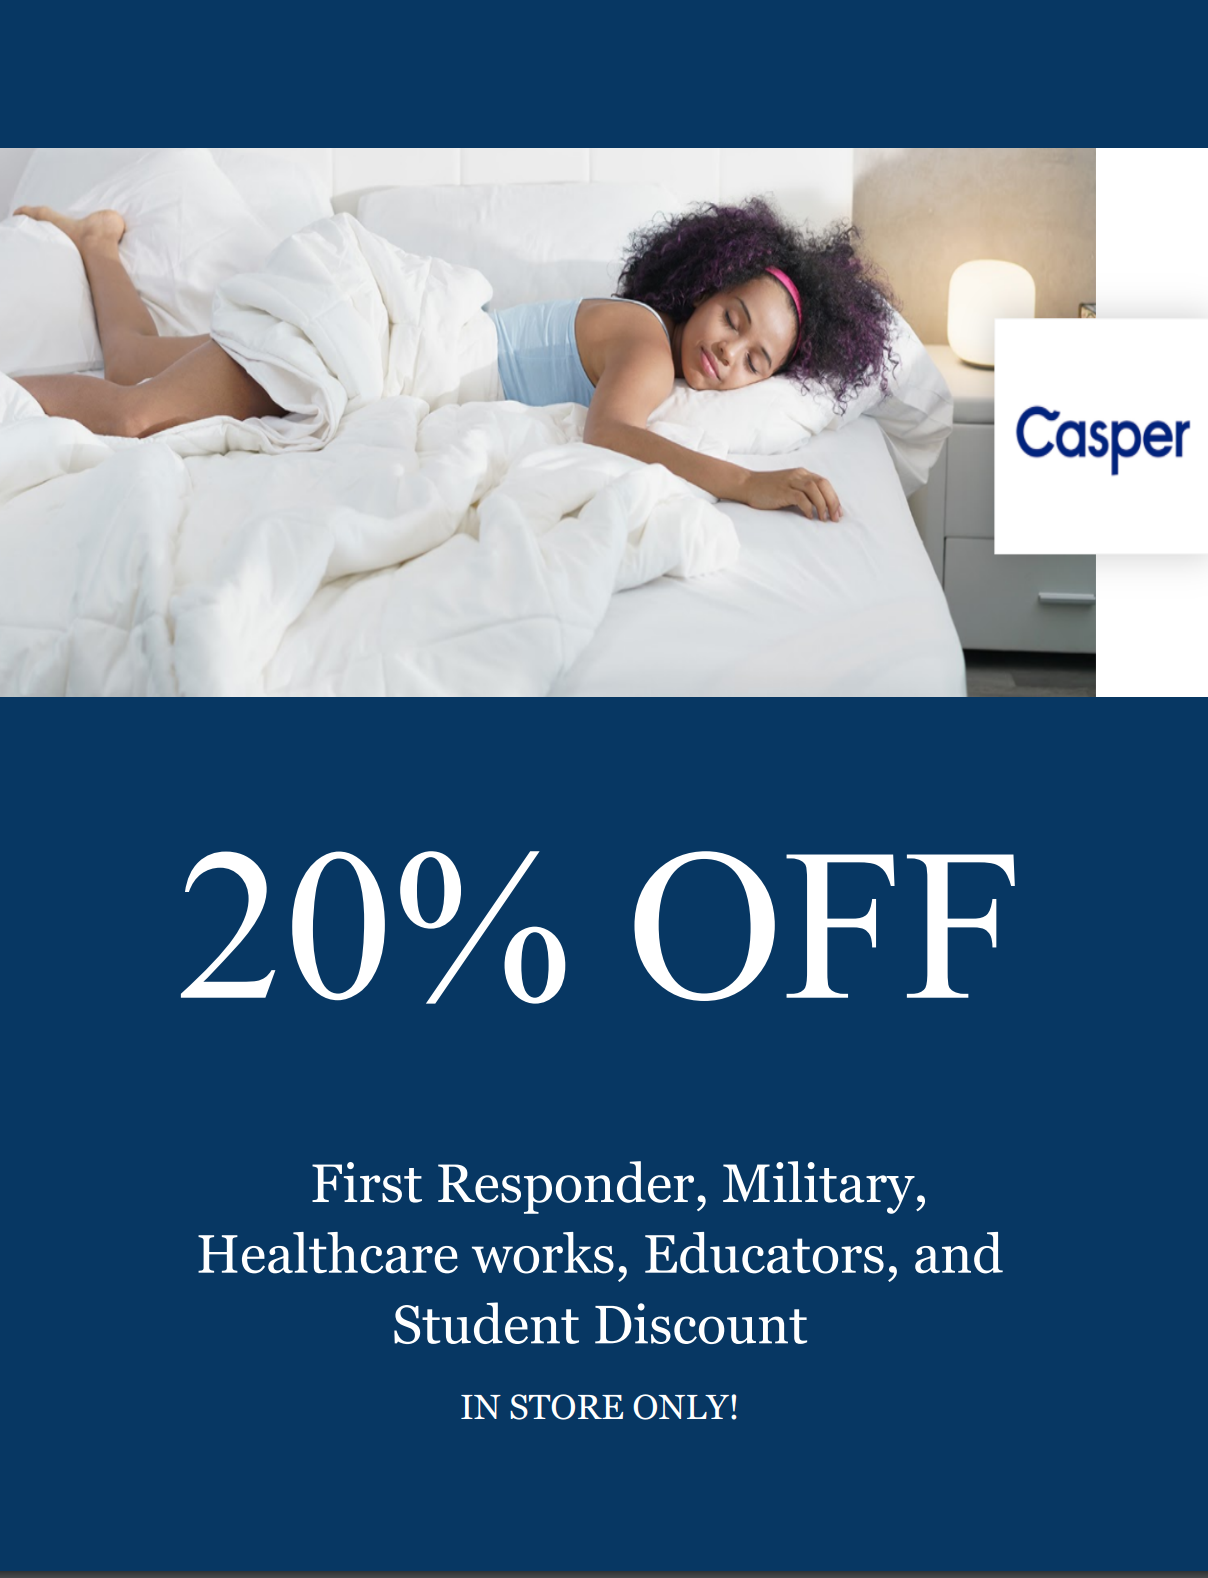 20% off for military, healthcare, first responders and educators from Casper